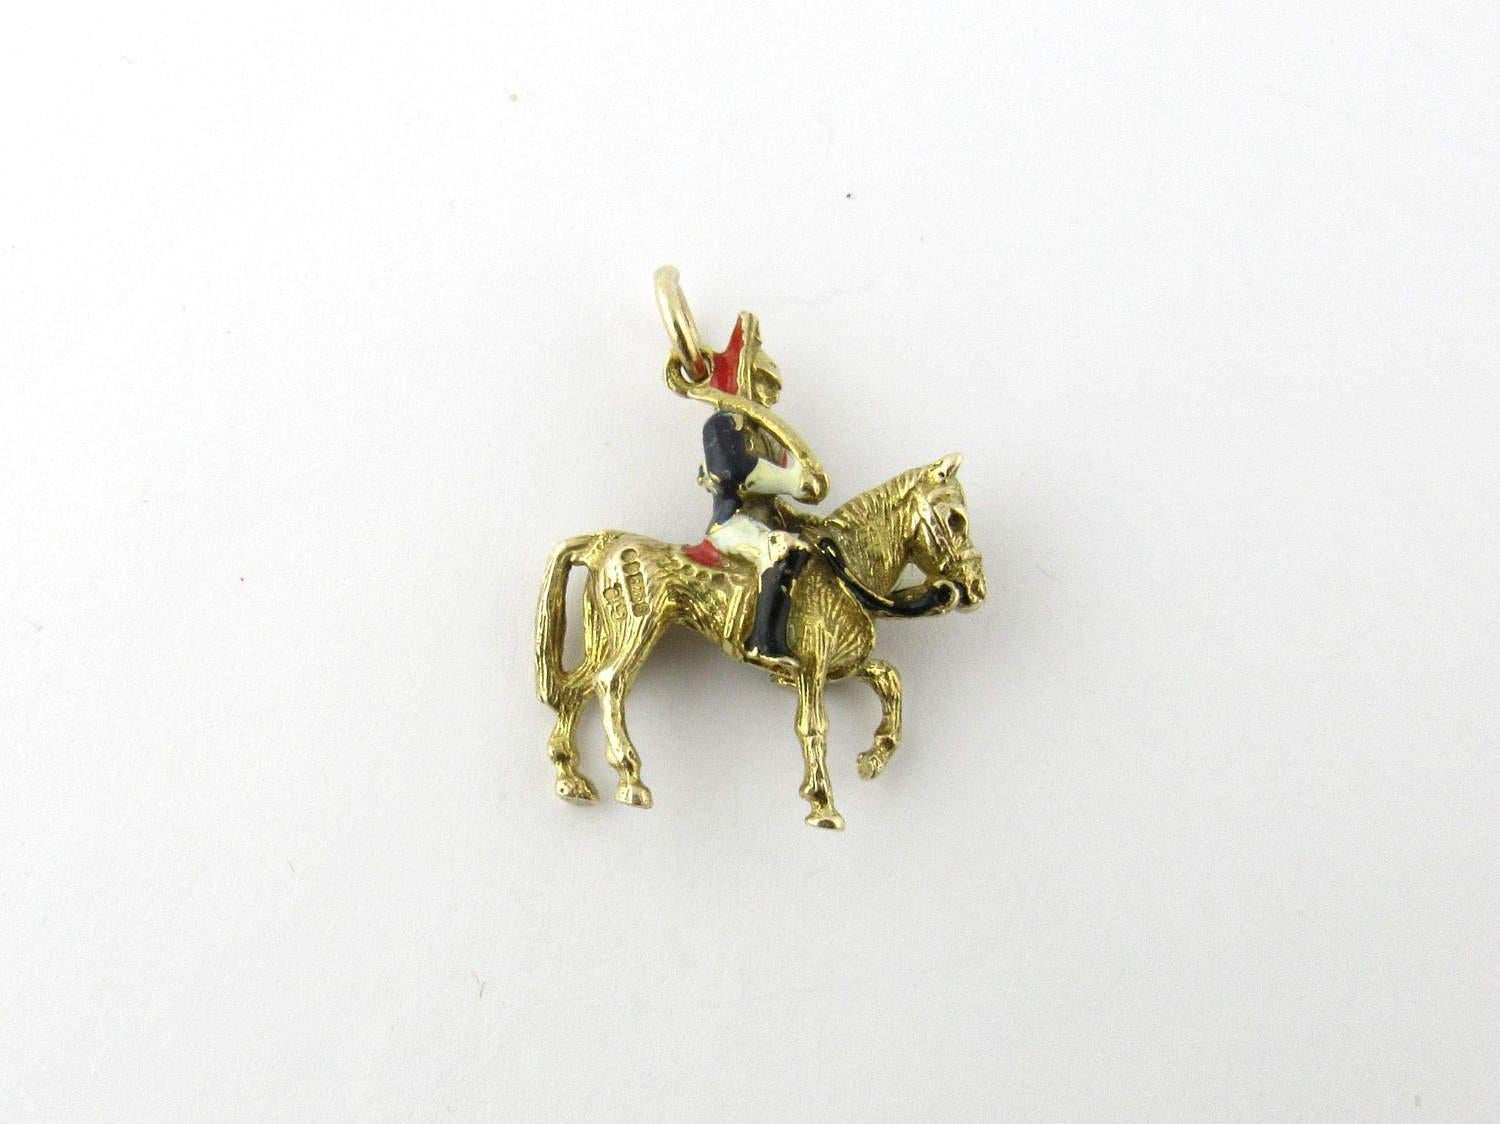 Vintage 9 Karat Yellow Gold and Enamel British Soldier on Horse Charm

This proud British soldier sitting on his stallion carries his saber over his shoulder. His traditional uniform is accented with black, white and red enamel. Some wear associated